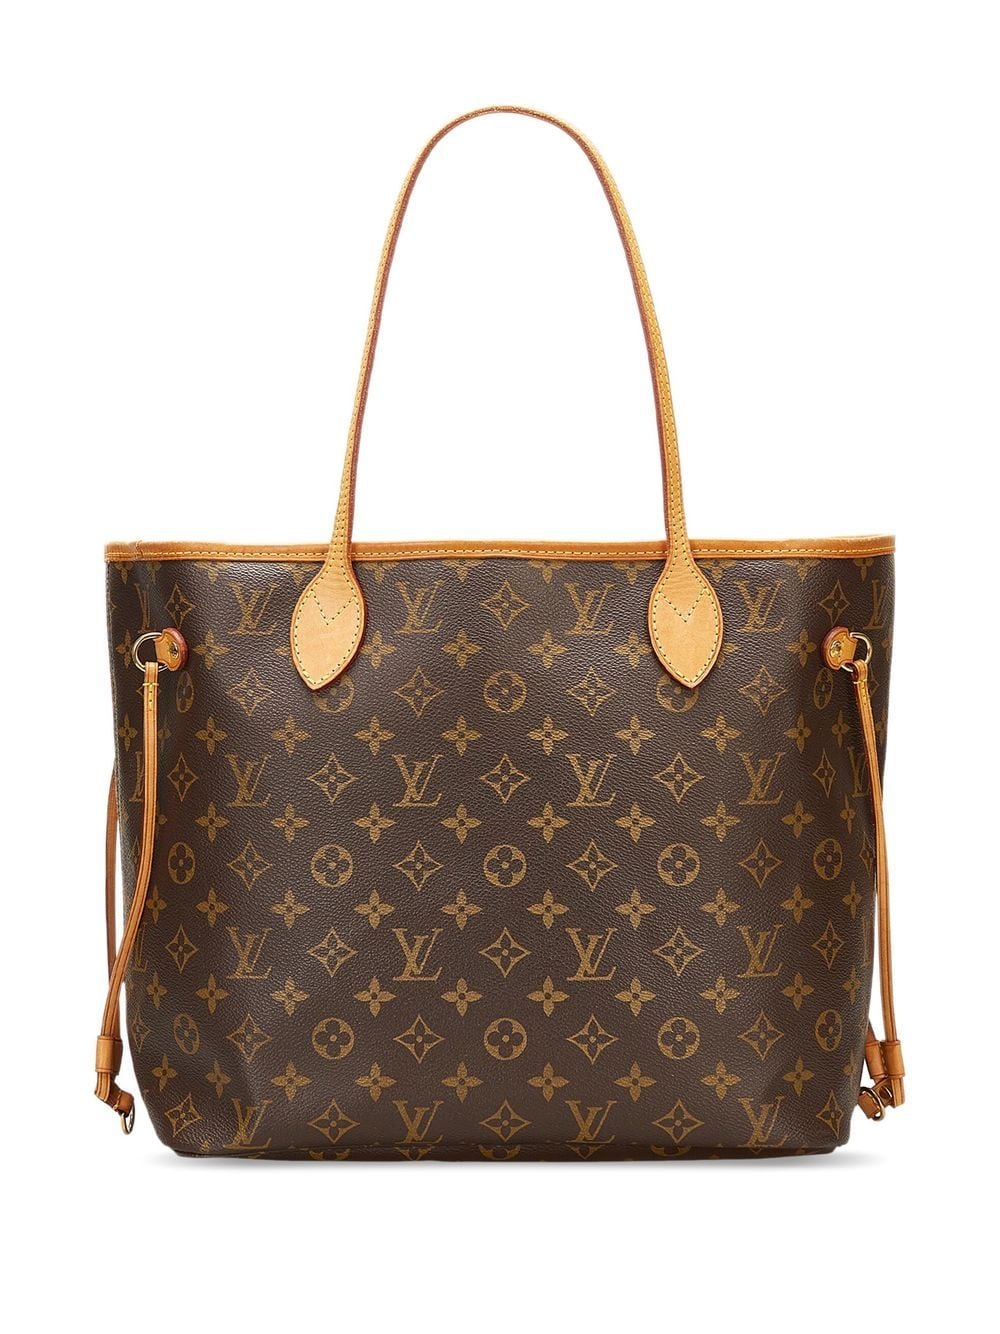 Louis Vuittons Most Iconic Bags A History